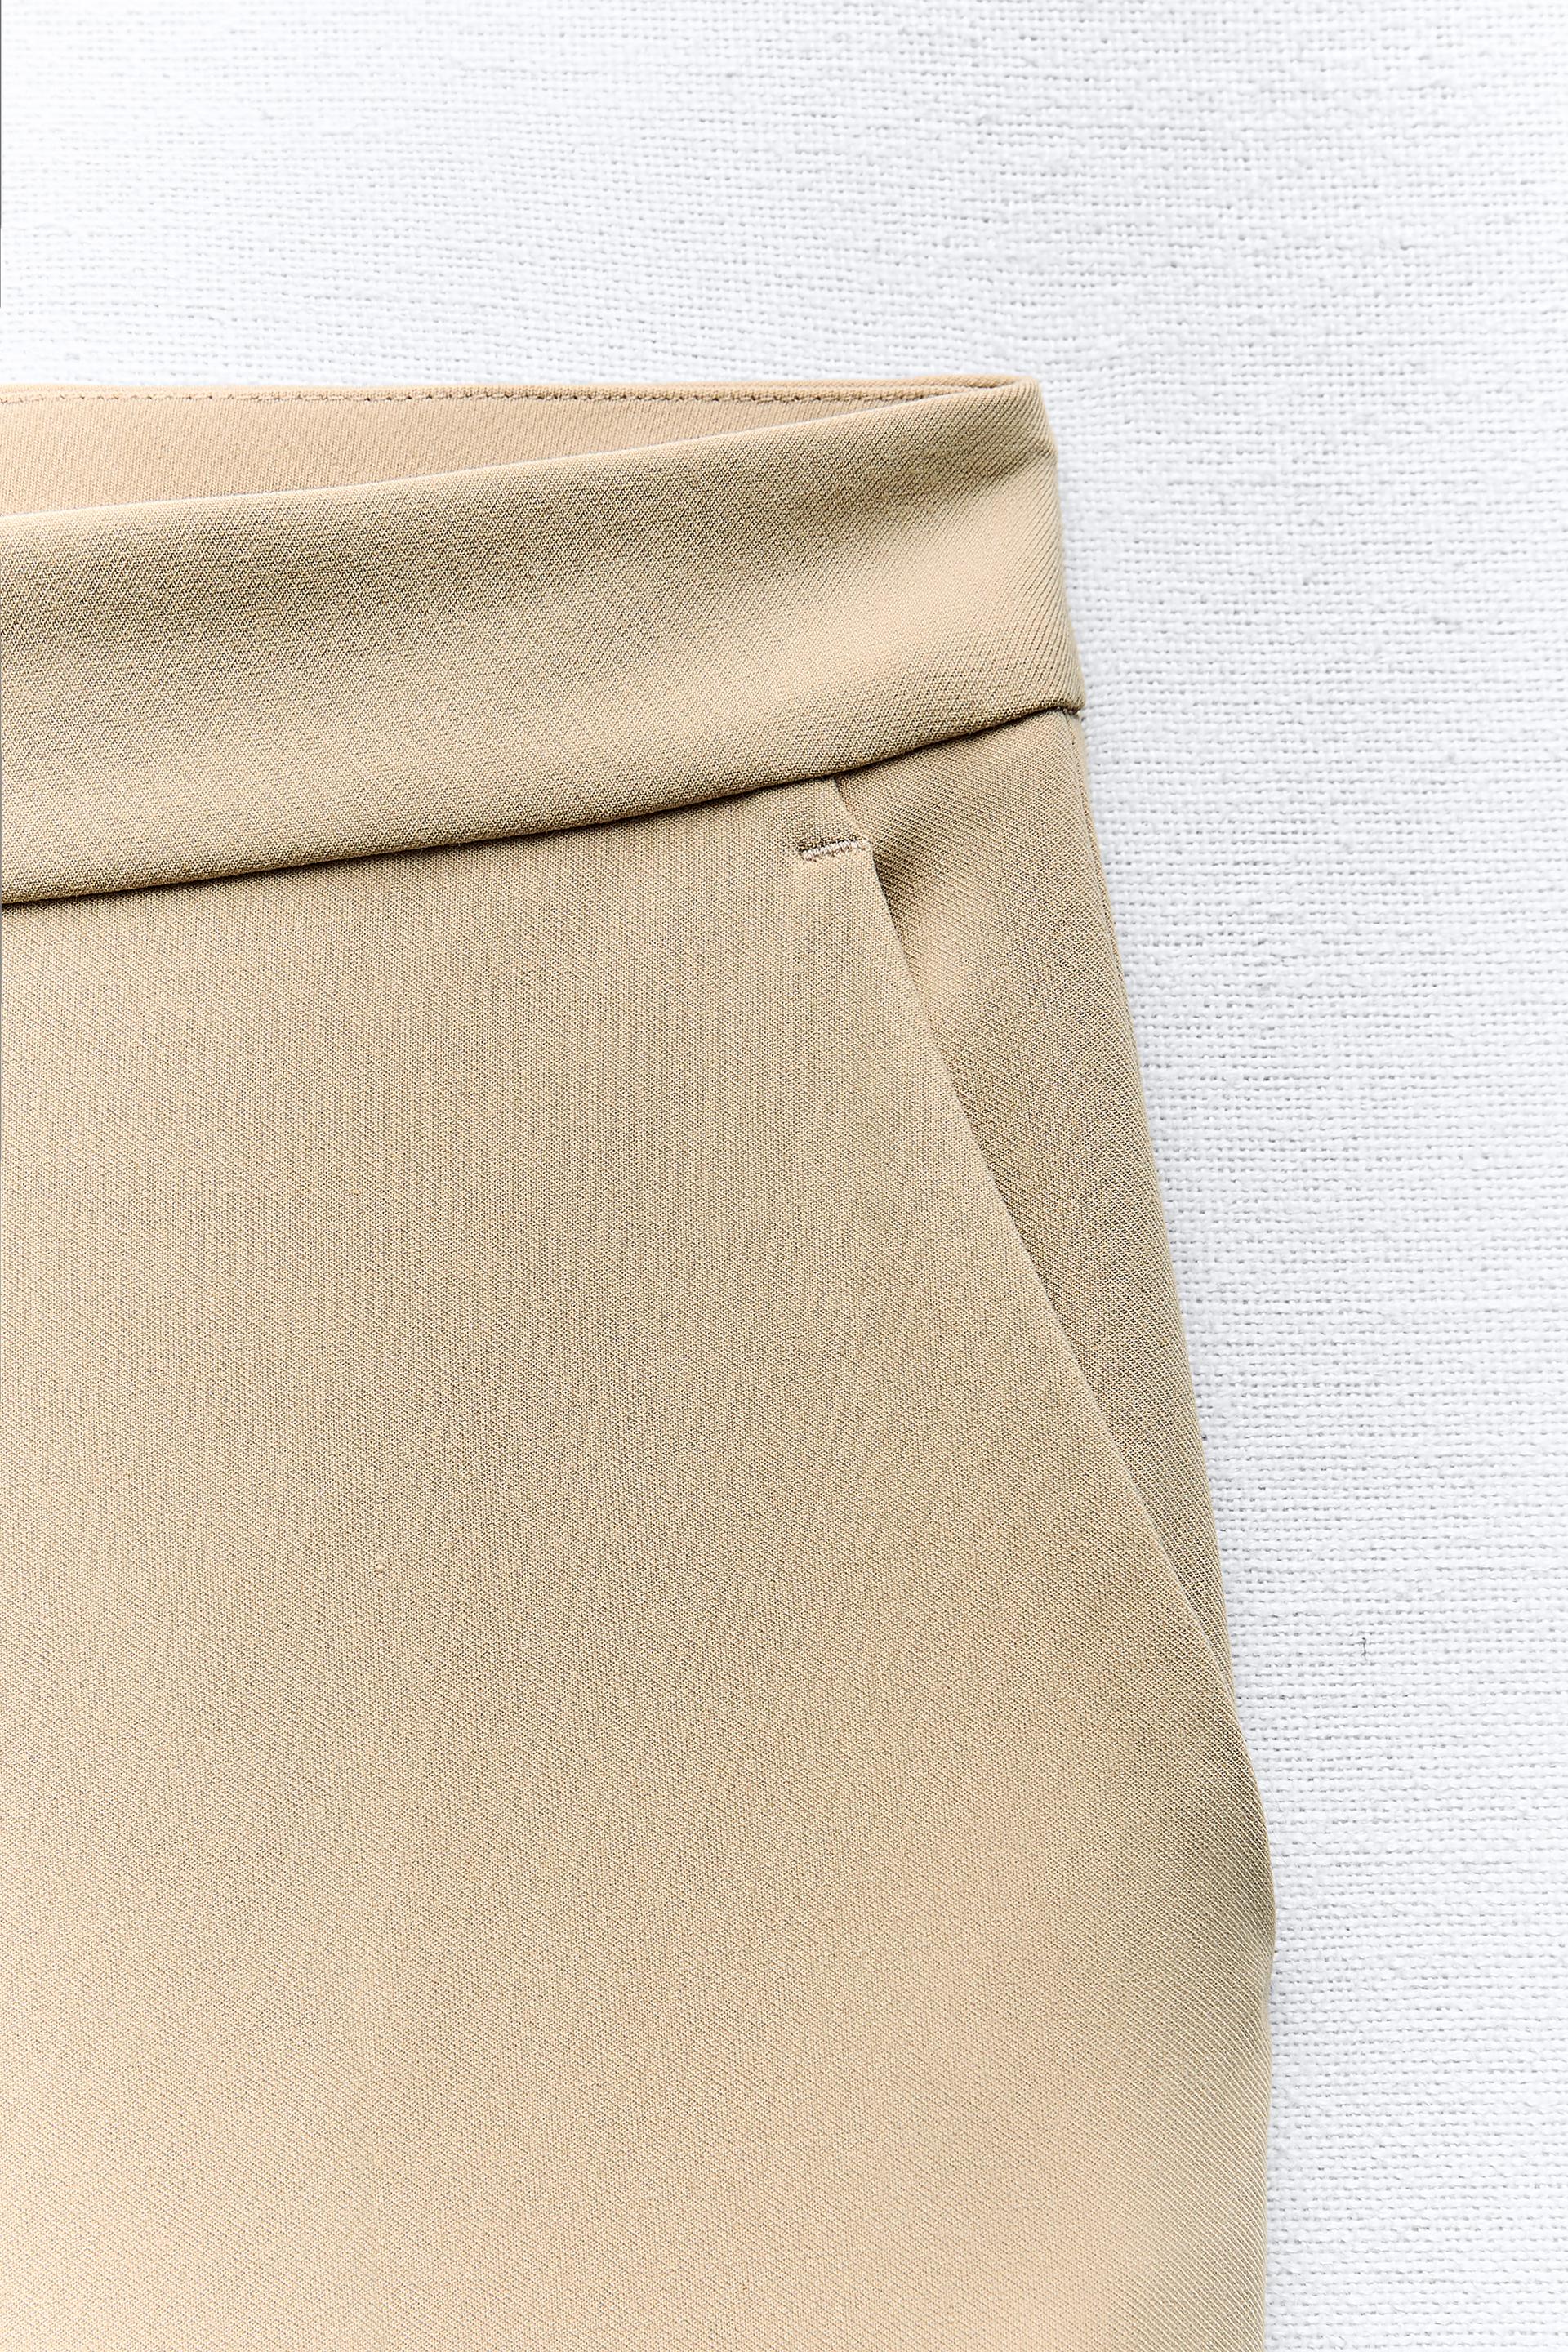 ZARA WOMENS HIGH Waist Cropped Pants Size Small Beige Taupe $35.00 -  PicClick